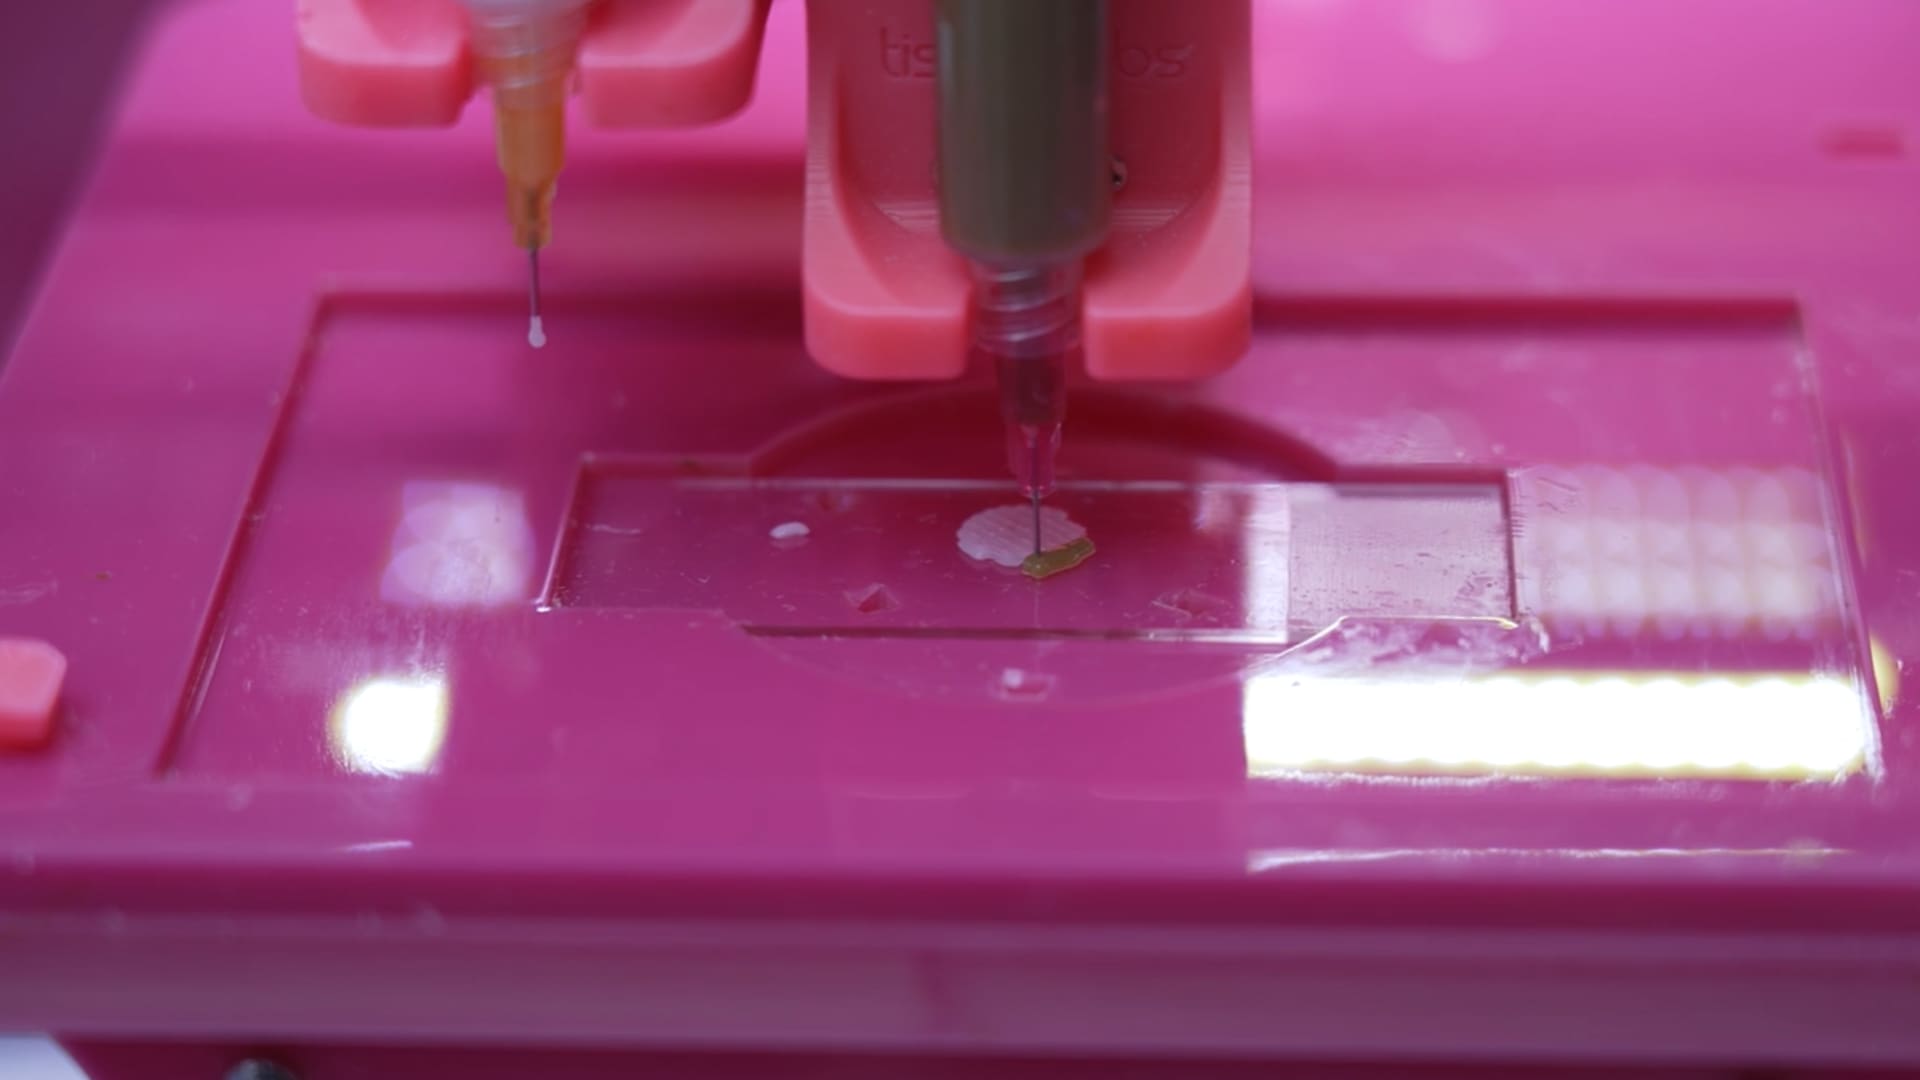 L’Oreal says it’s working on a form of bioprinted skin that can ‘feel’